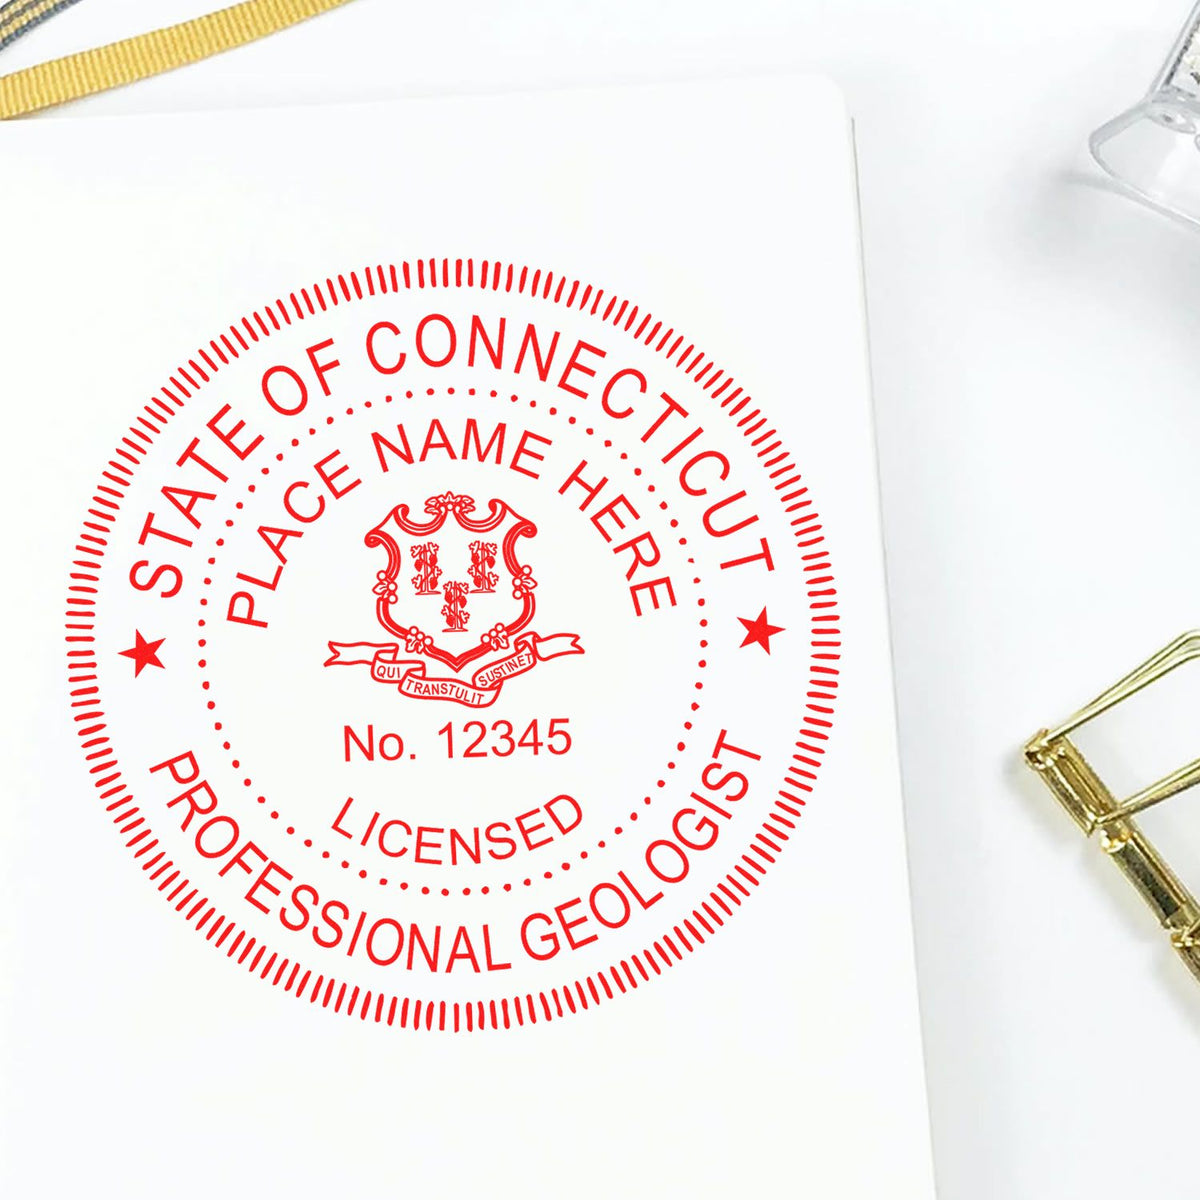 The Premium MaxLight Pre-Inked Connecticut Geology Stamp stamp impression comes to life with a crisp, detailed image stamped on paper - showcasing true professional quality.